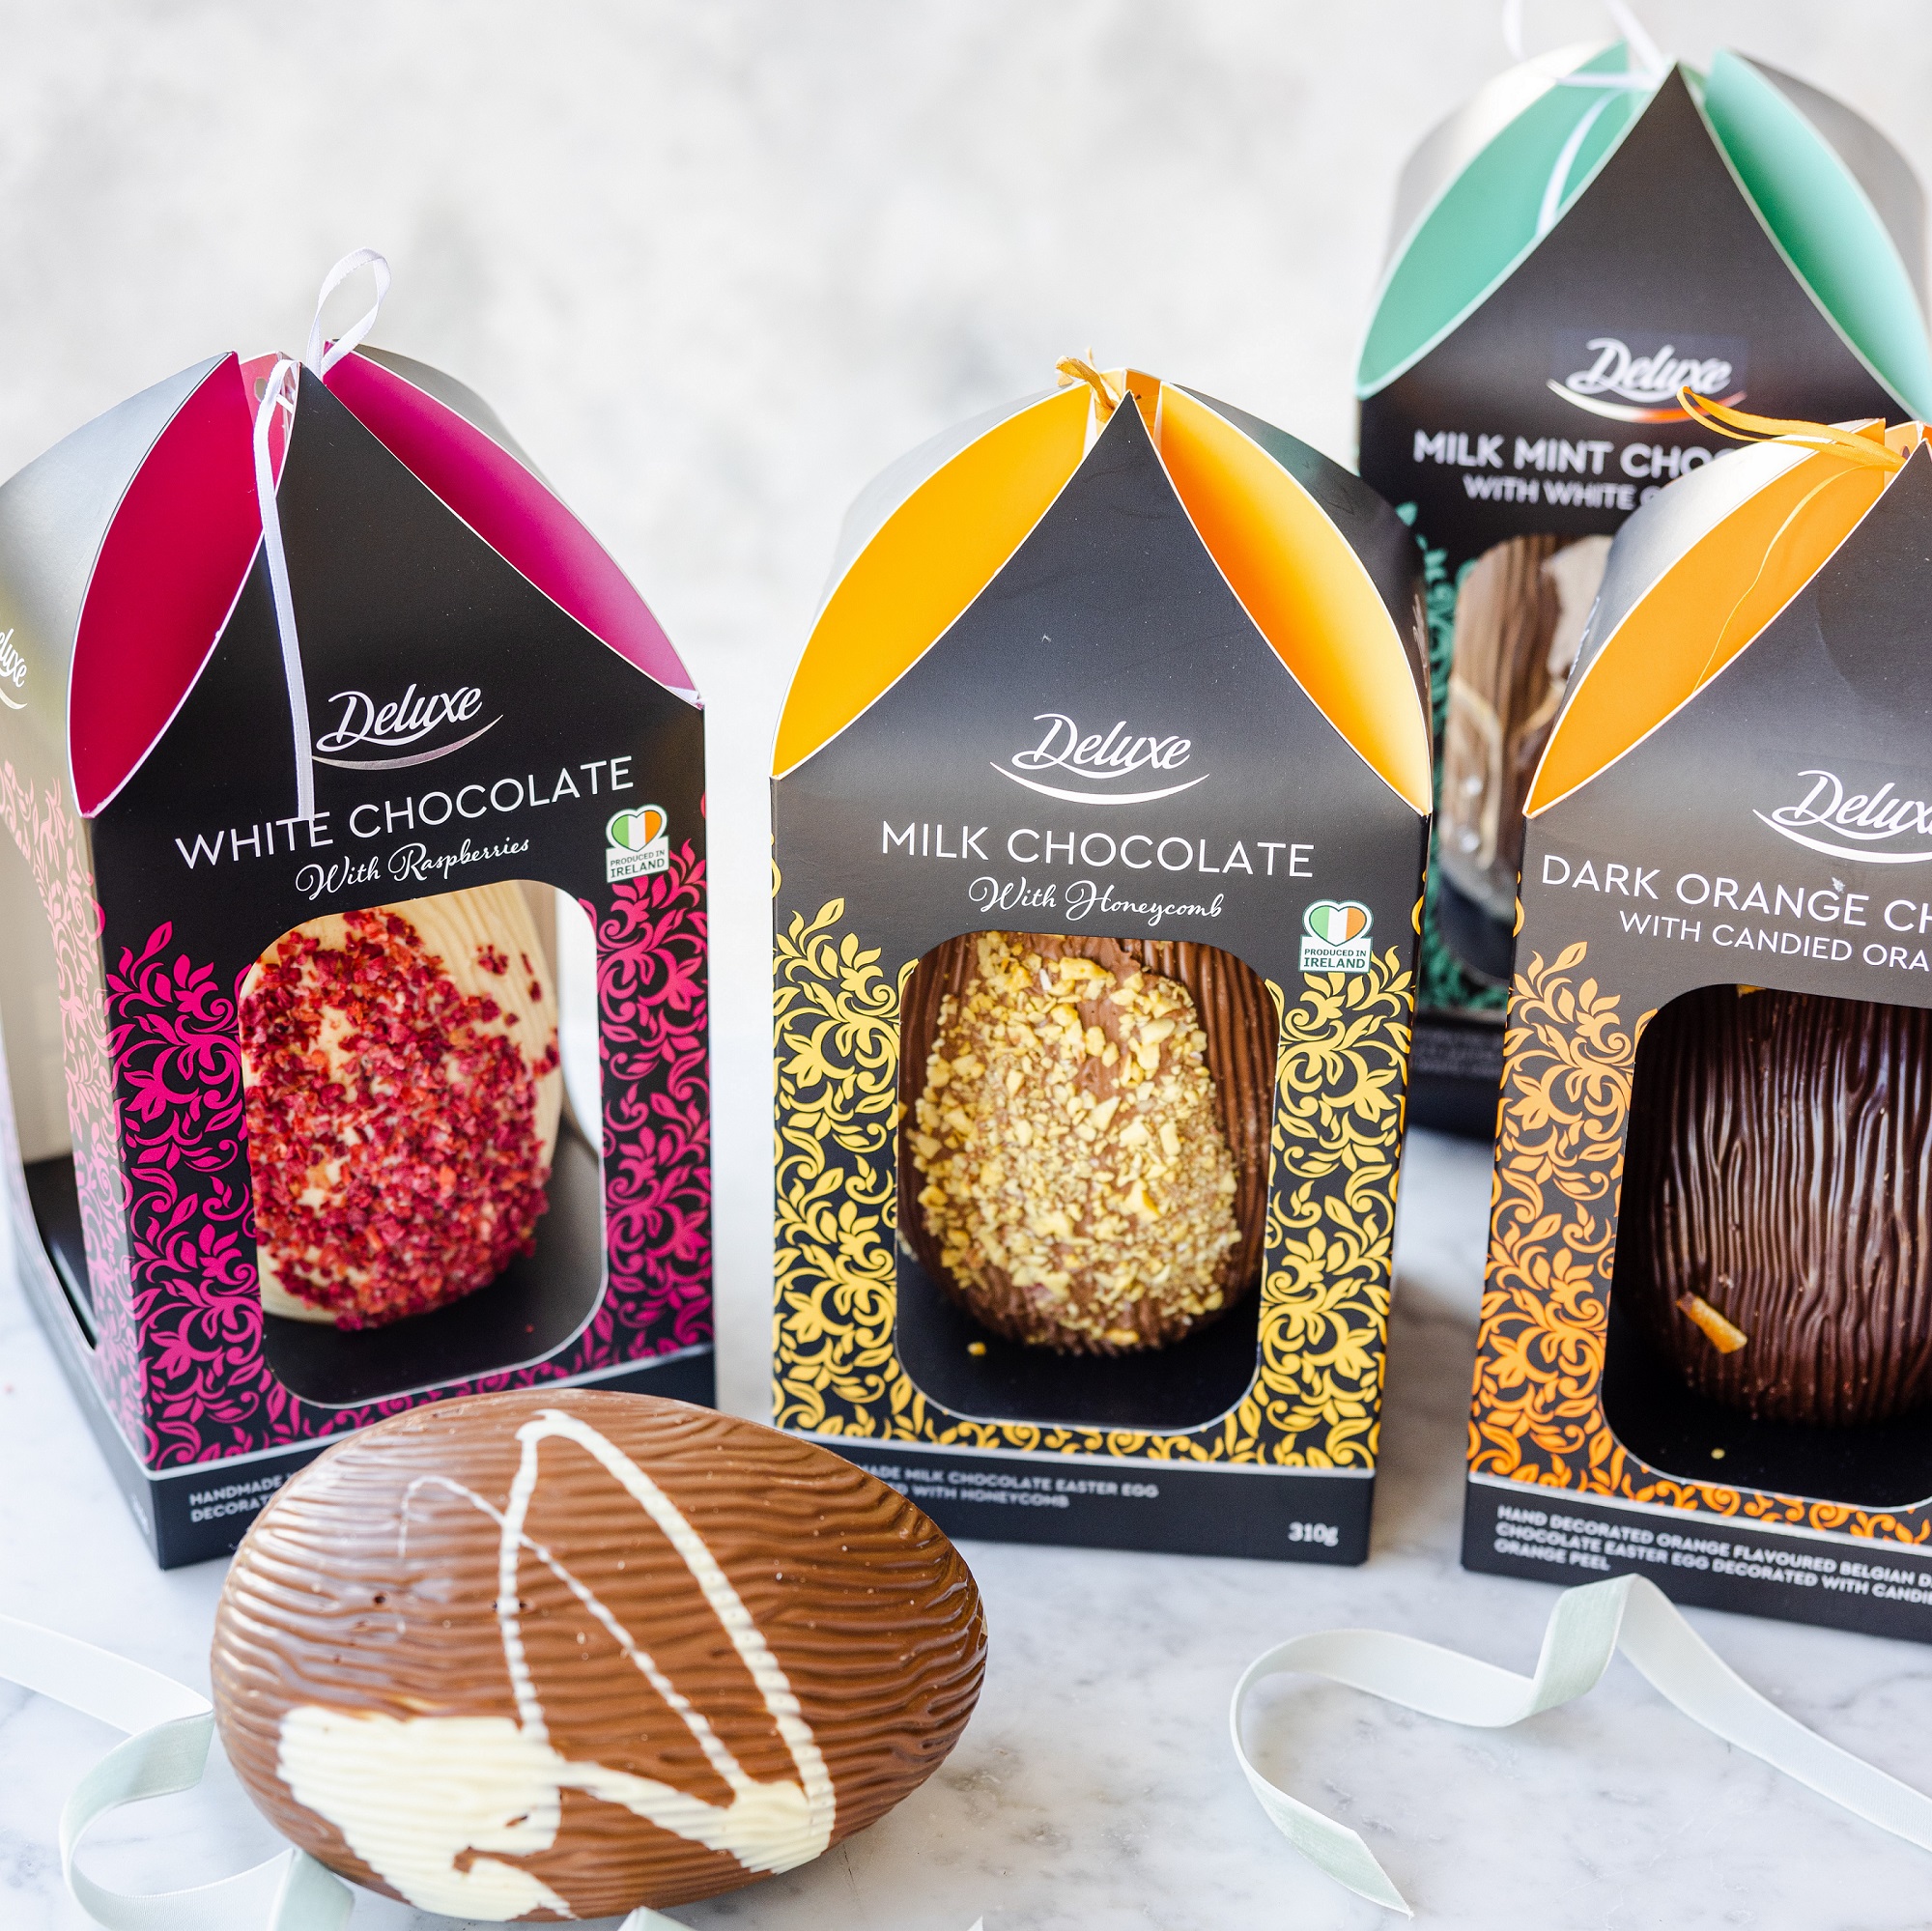 Lidl Northern Ireland’s handmade chocolate Easter eggs return with new ‘egg-stra’ special range